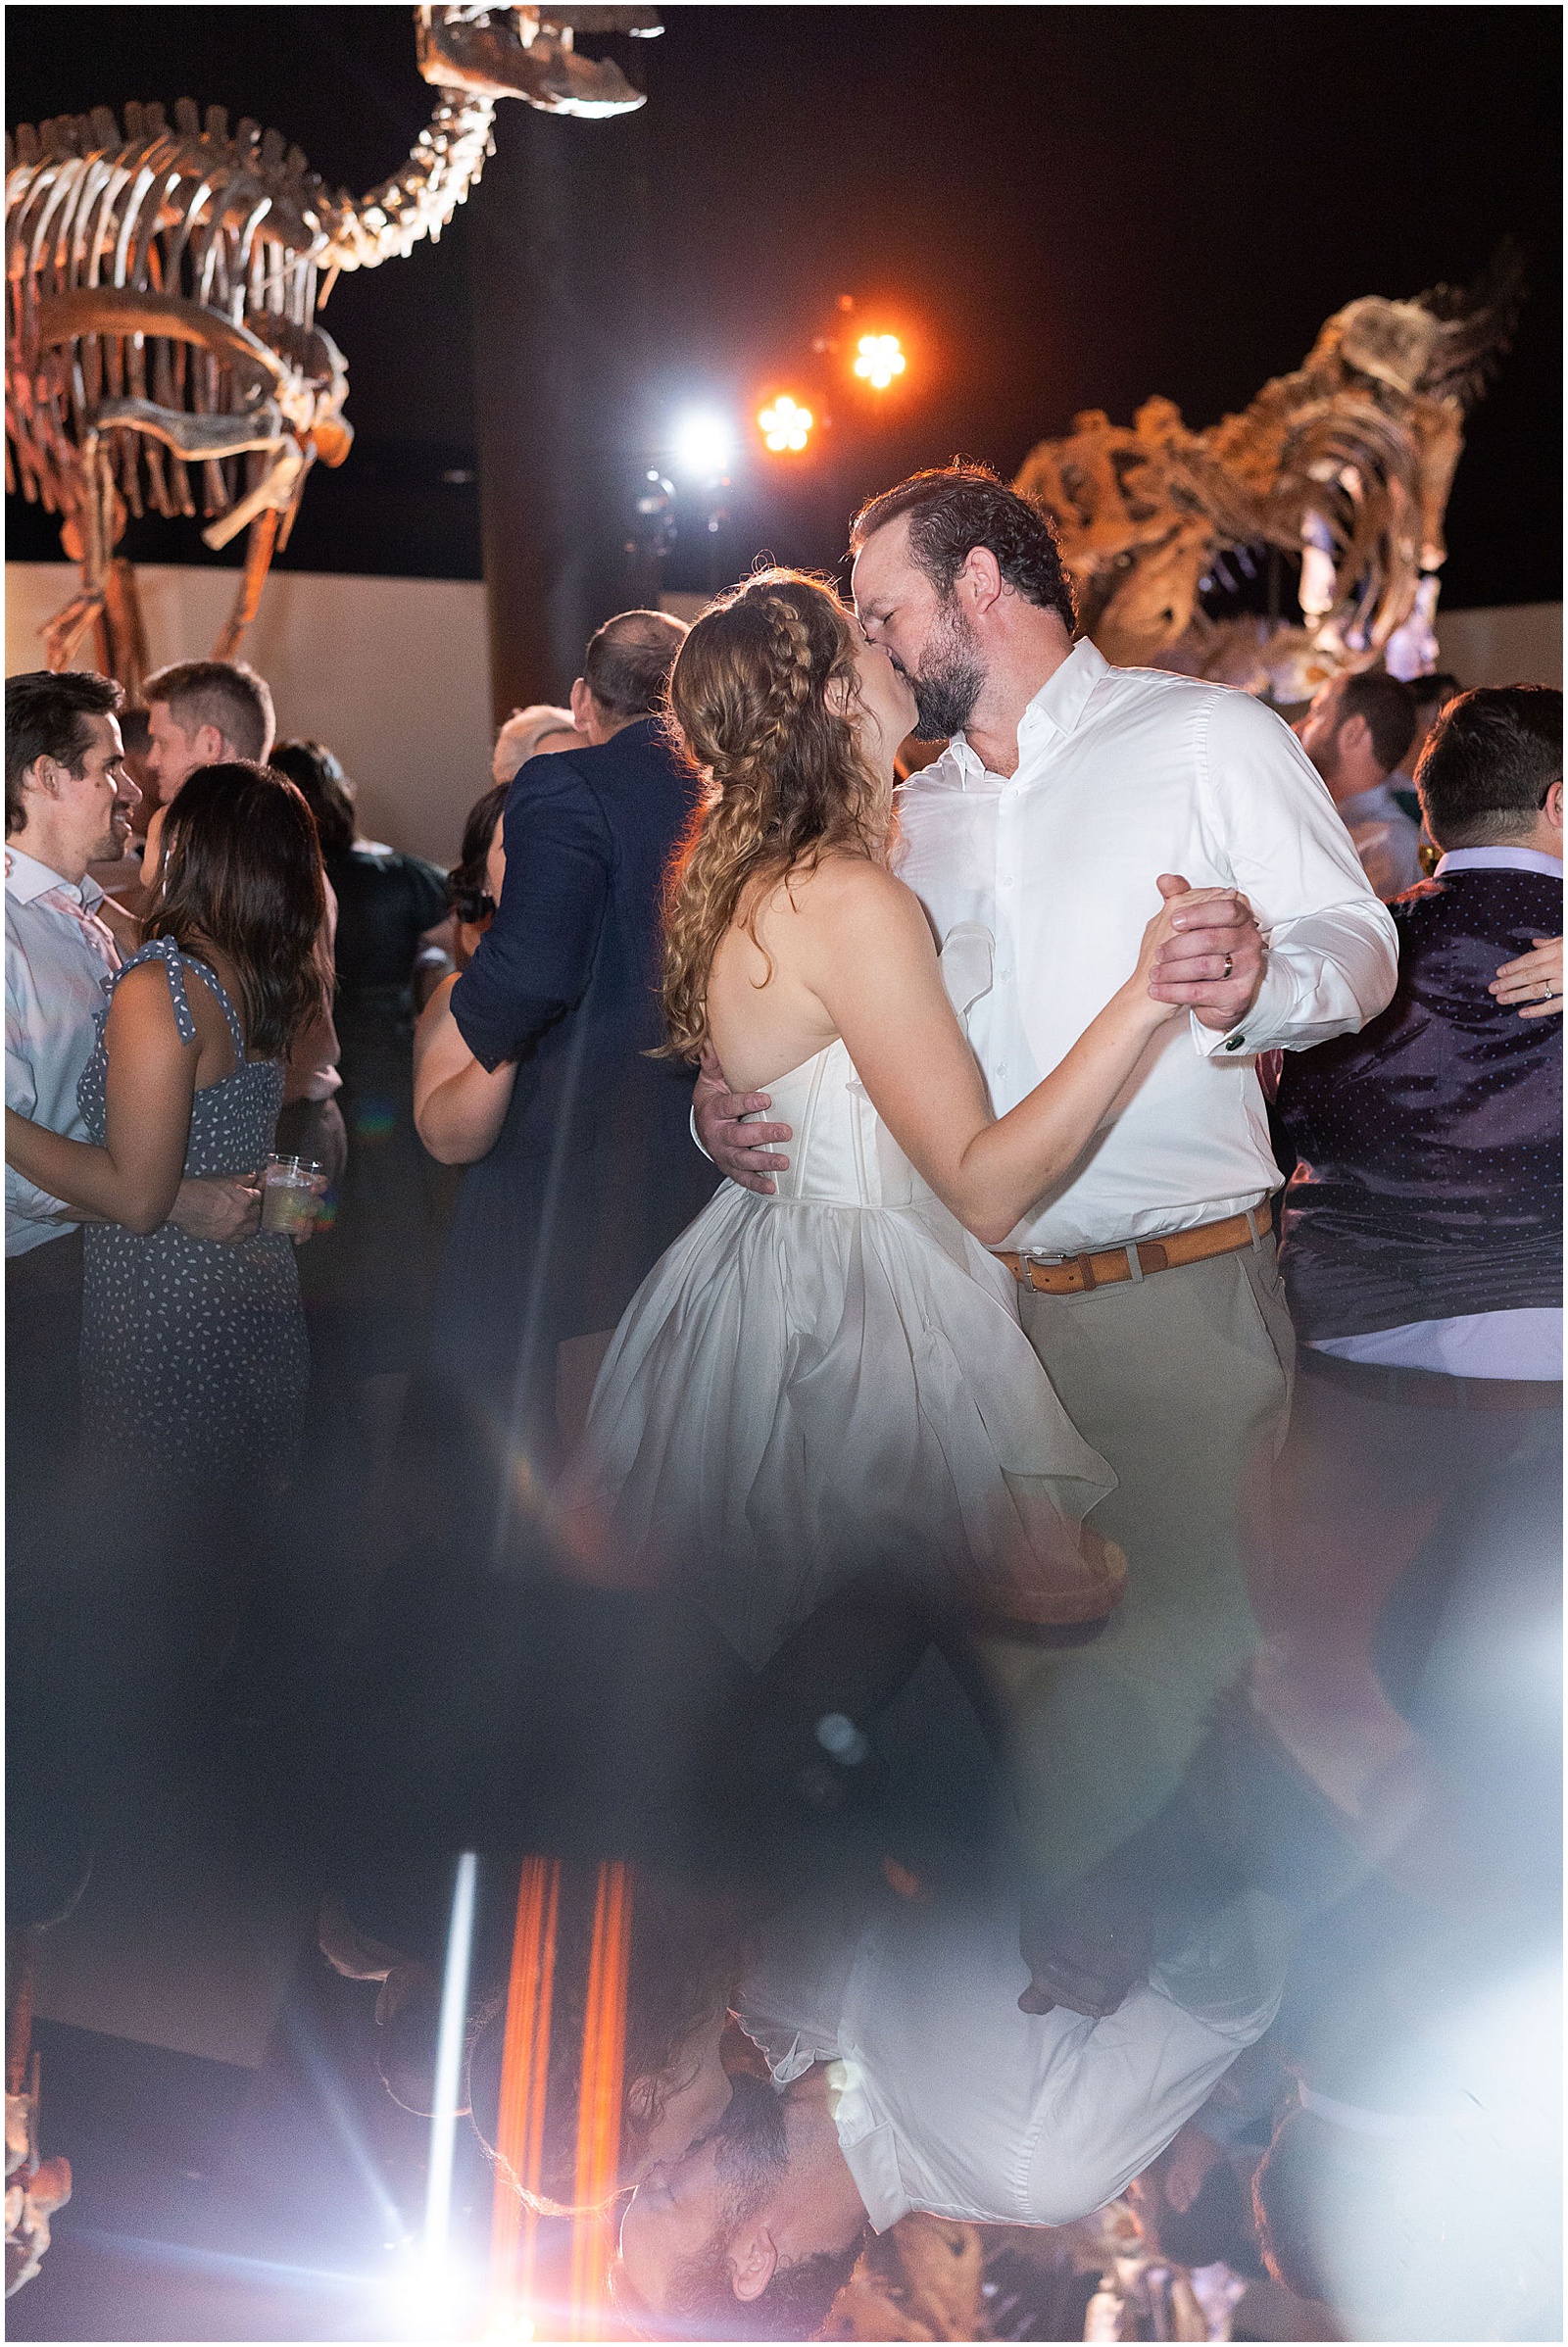 Dancing with Dinosaurs at Houston Museum of Natural Science Wedding Reception | Swish and Click Photography | Prism Photography